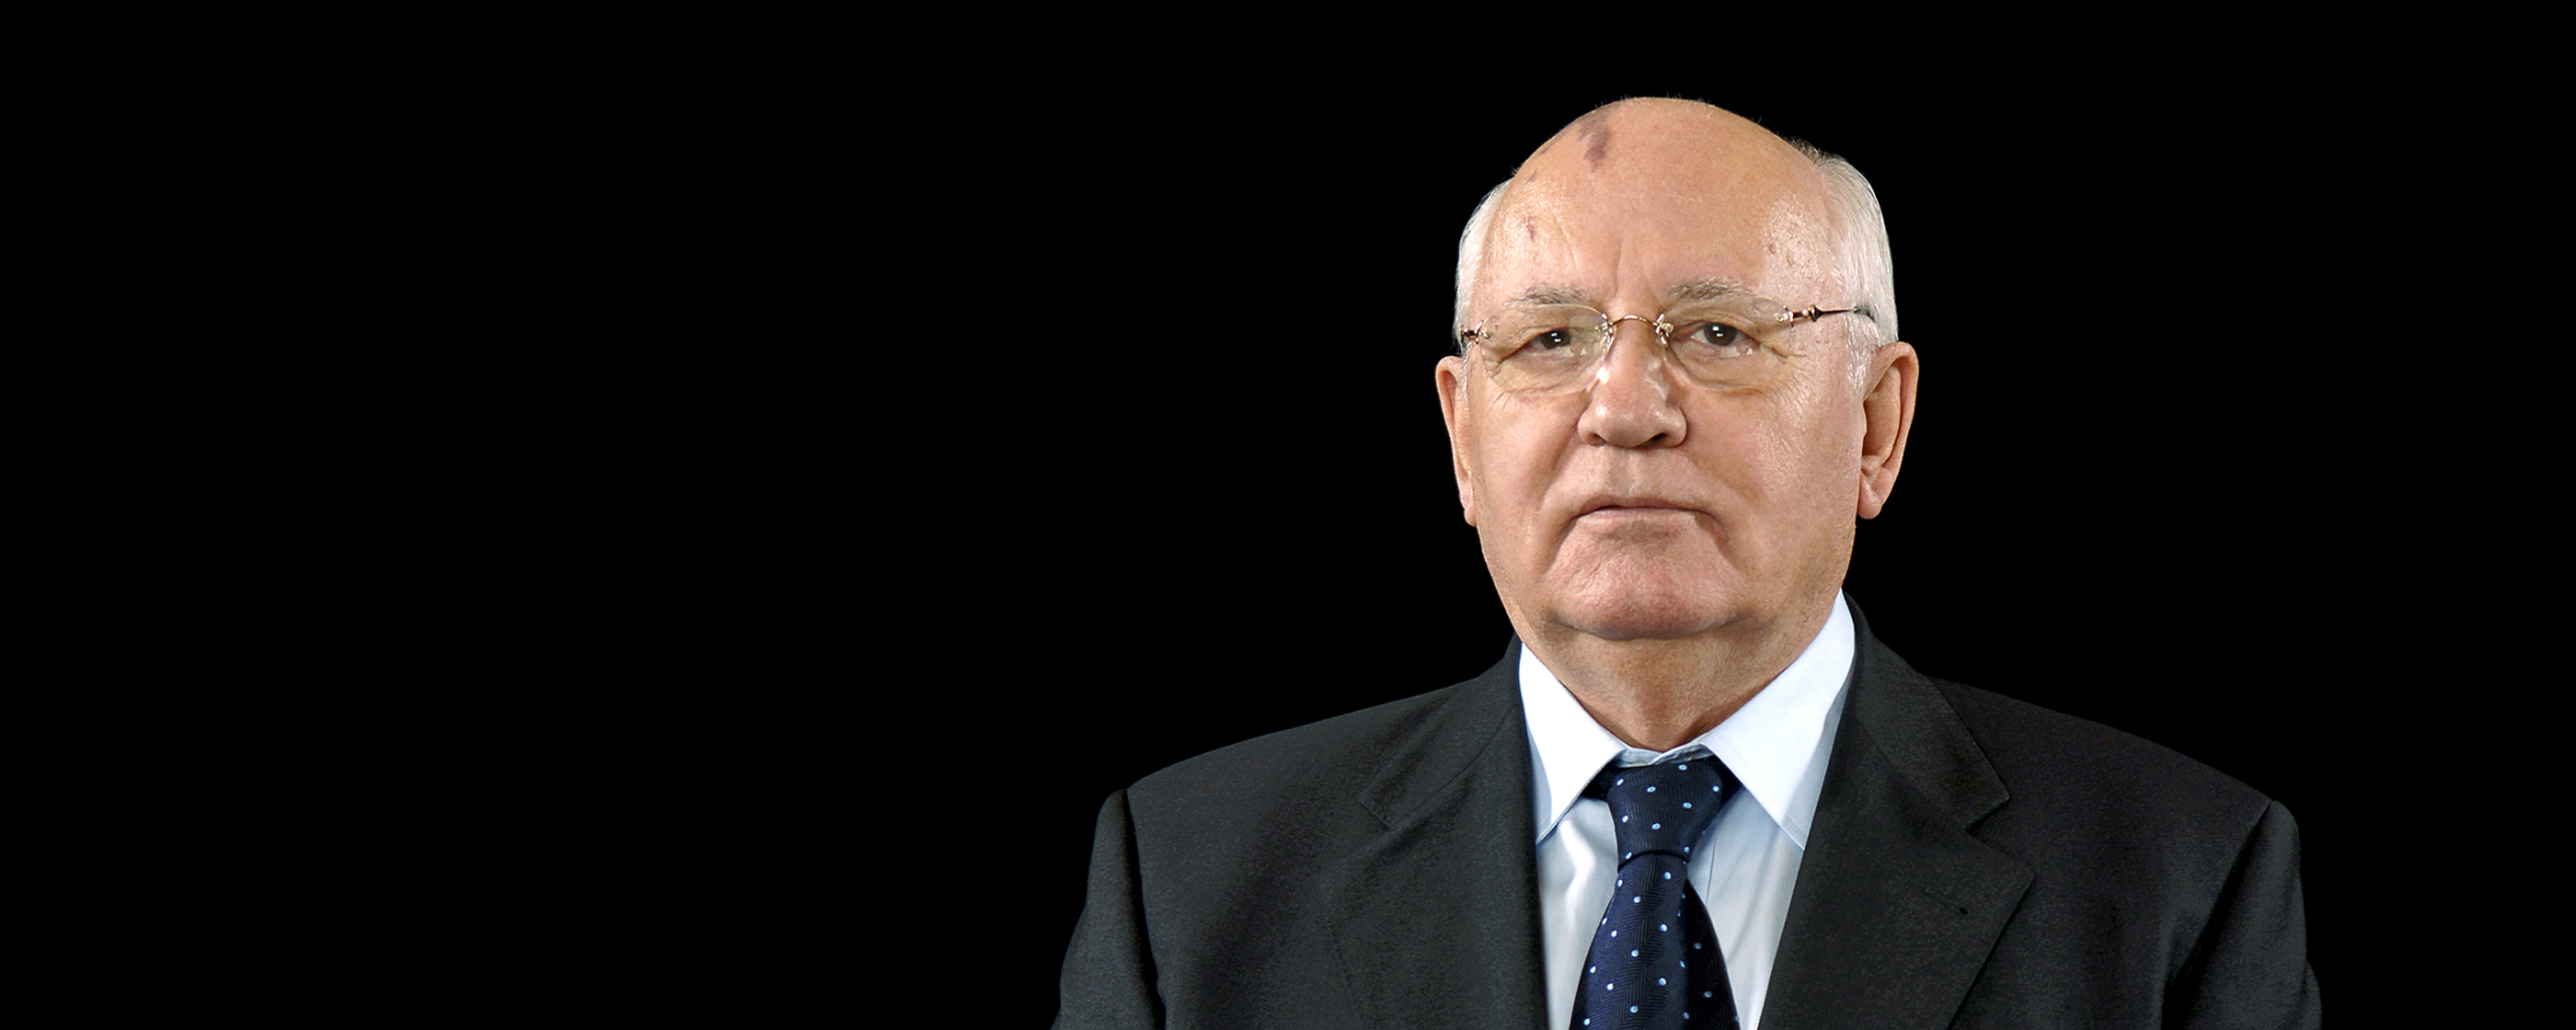 Welcome to : Mikhail Gorbachev Belongs To The Ages